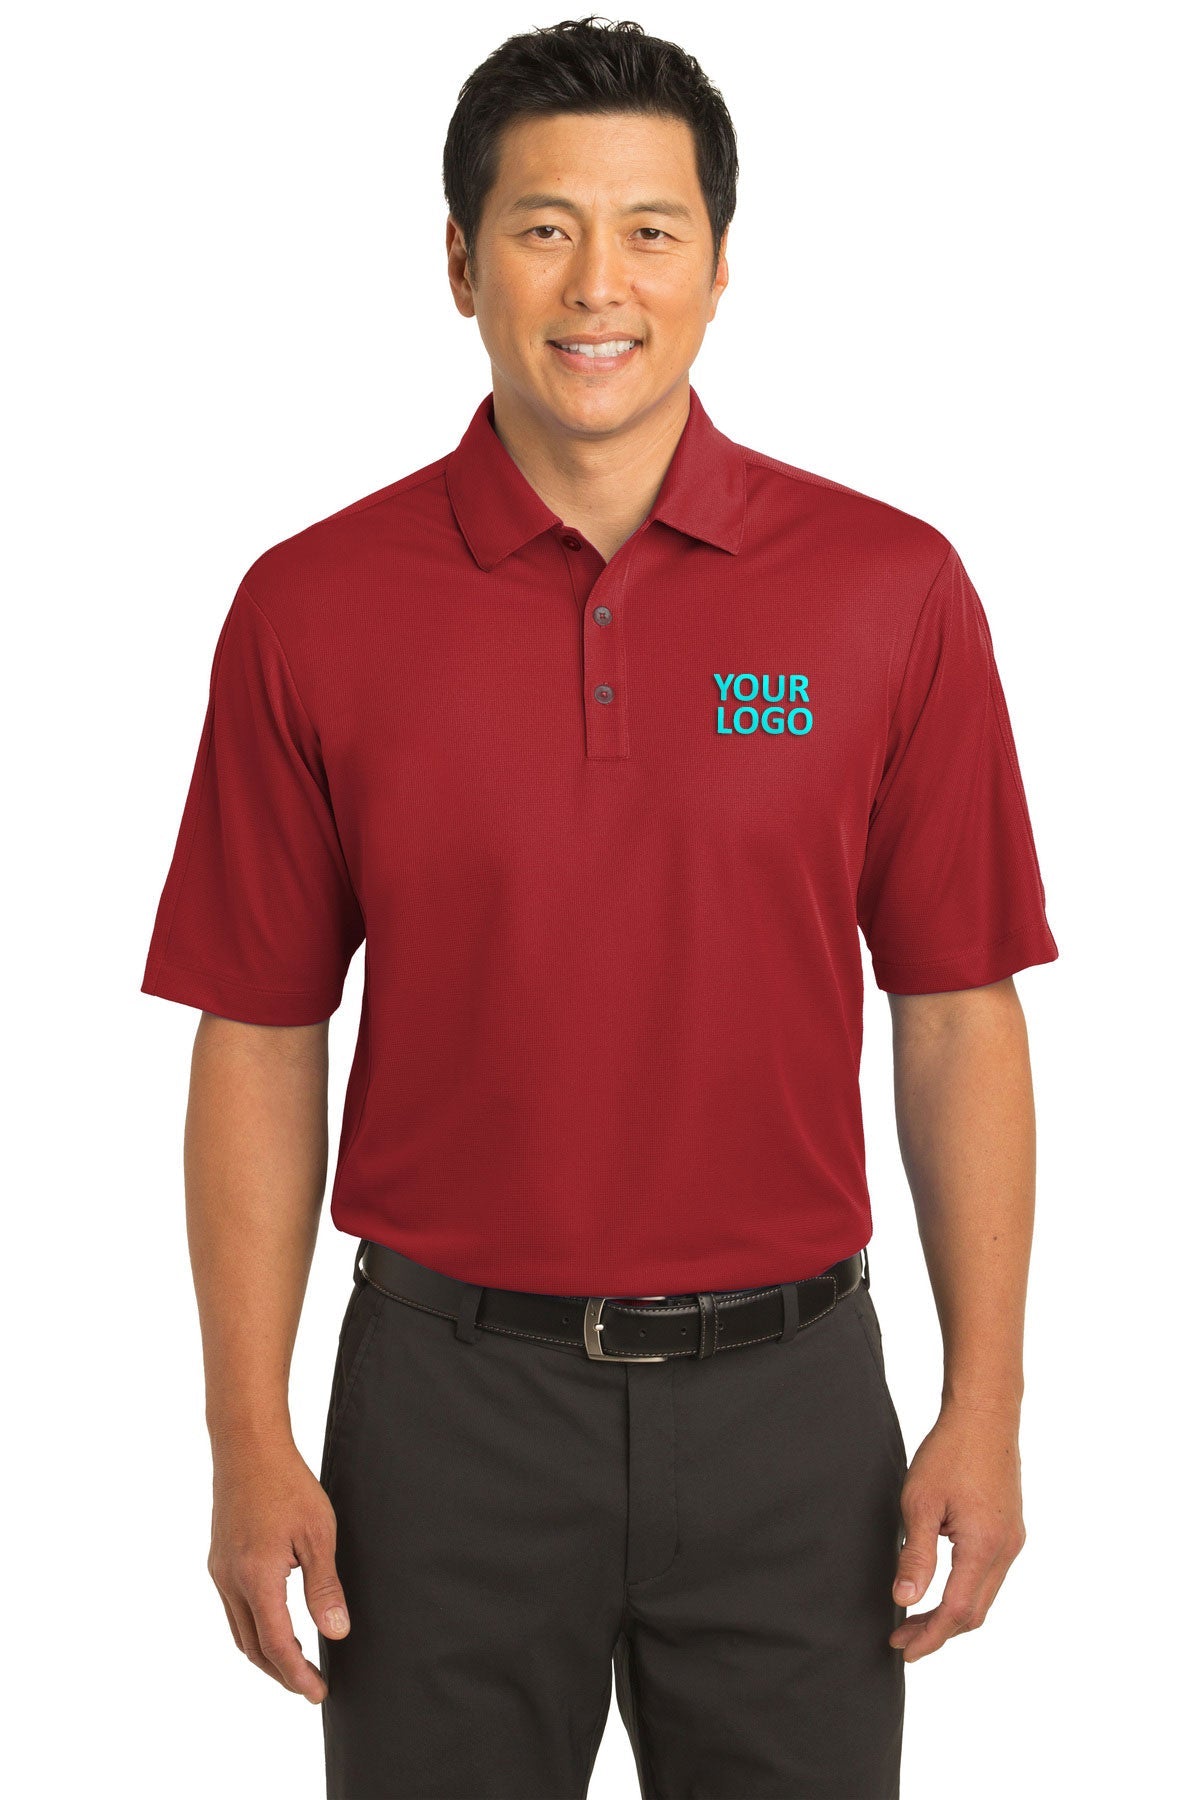 nike team red 266998 embroidered work polo shirts